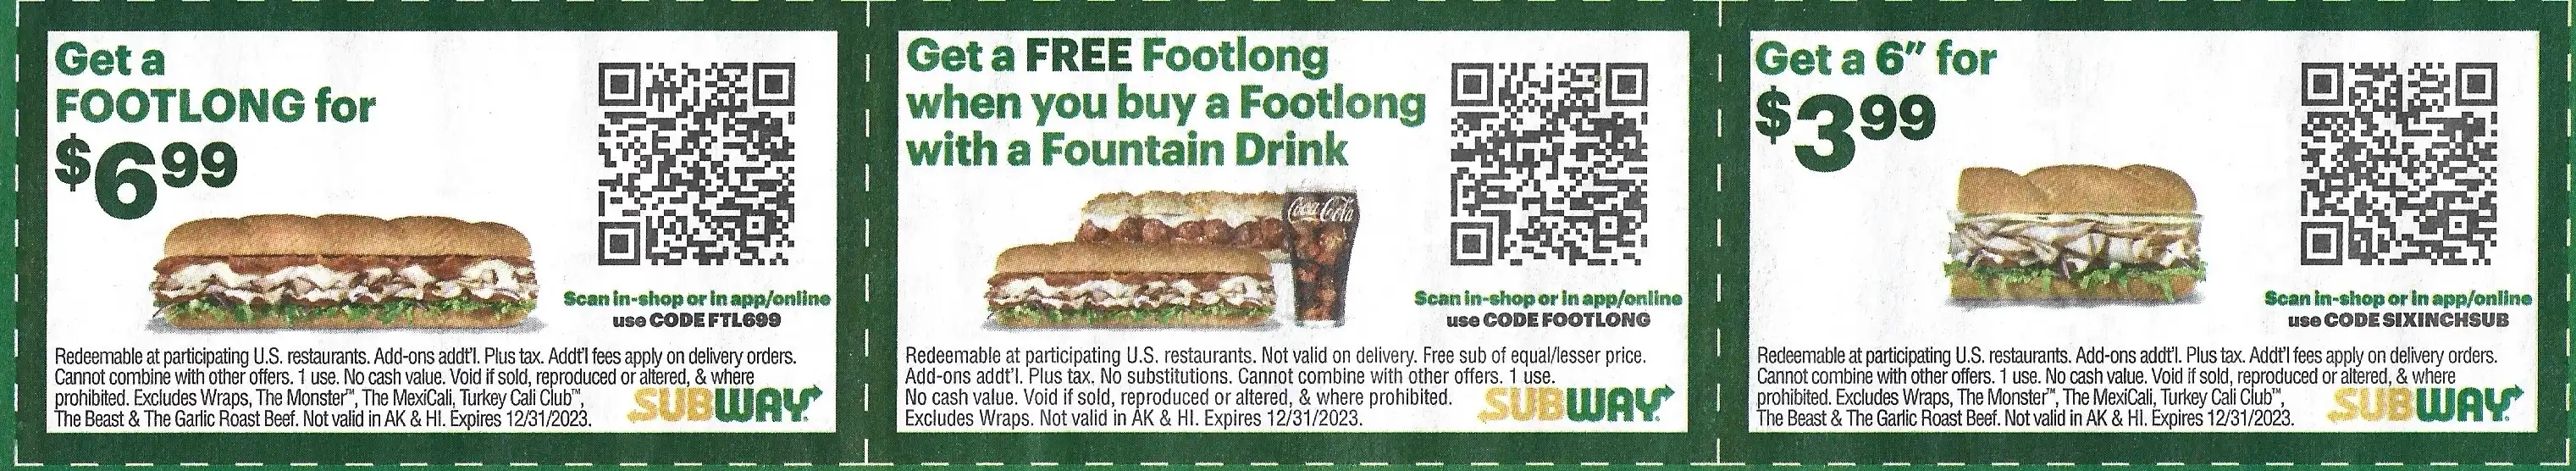 Subway Coupons QR Scannable Codes  Expires 12/31/2023 2